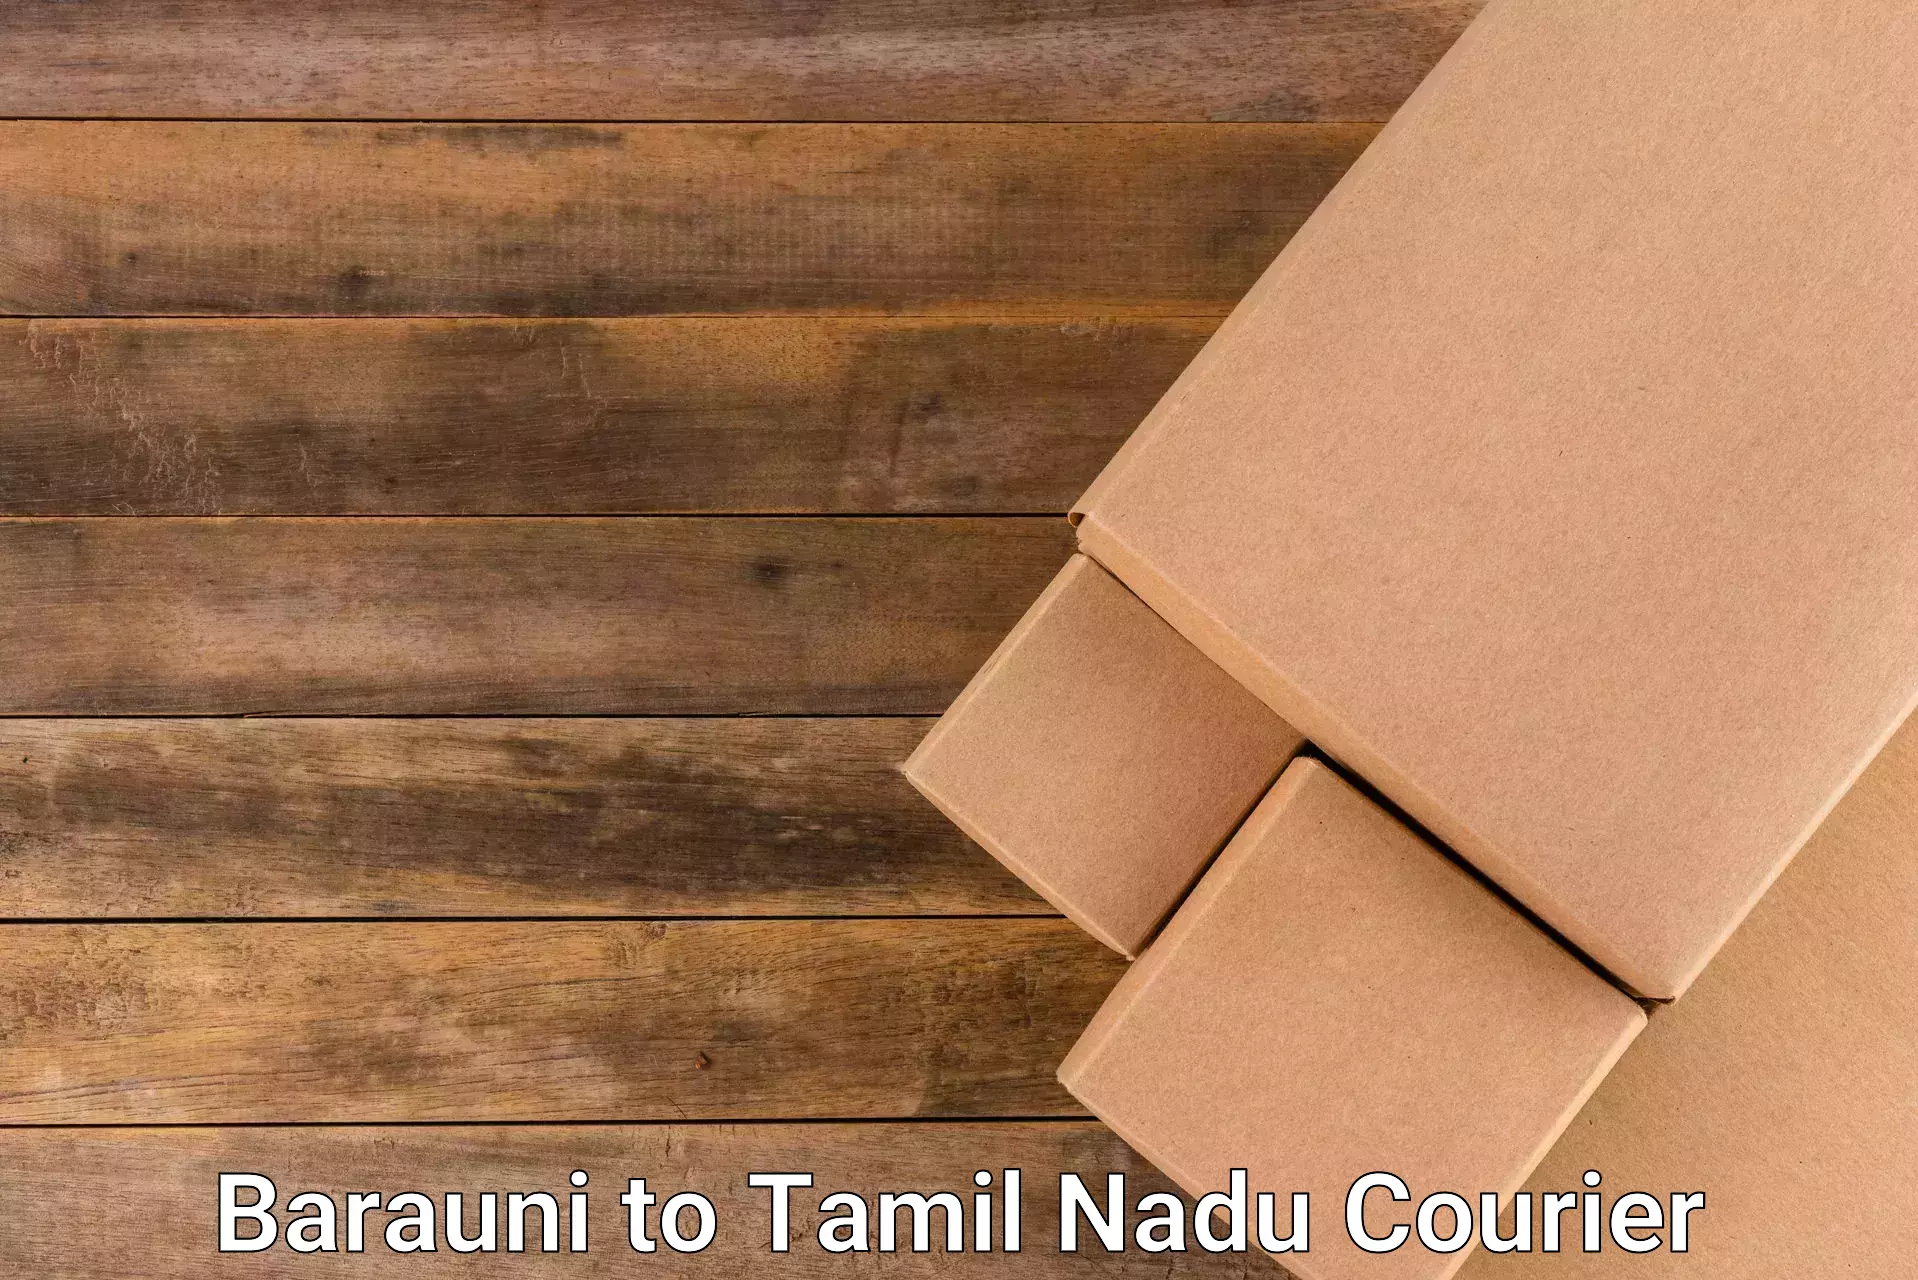 State-of-the-art courier technology Barauni to Gummidipoondi